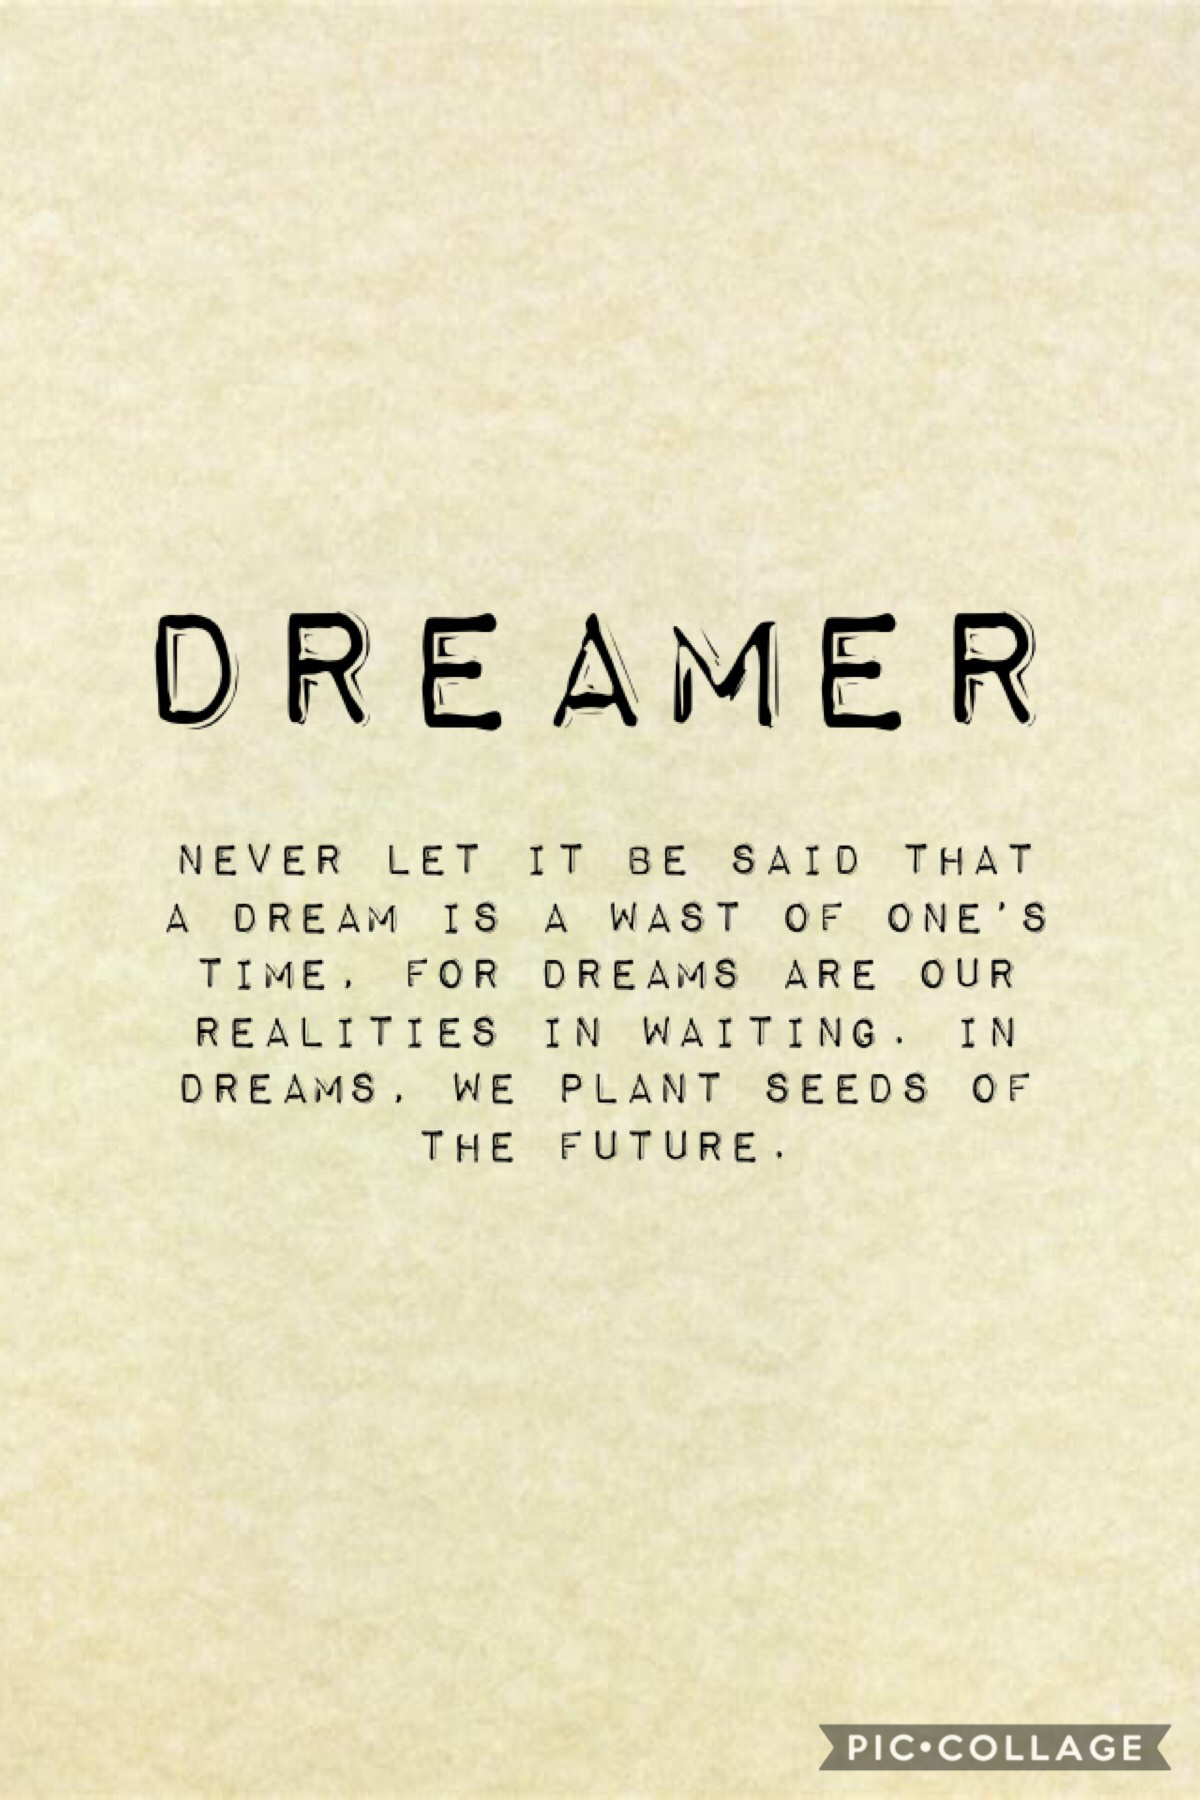 Don’t be afraid to dream.